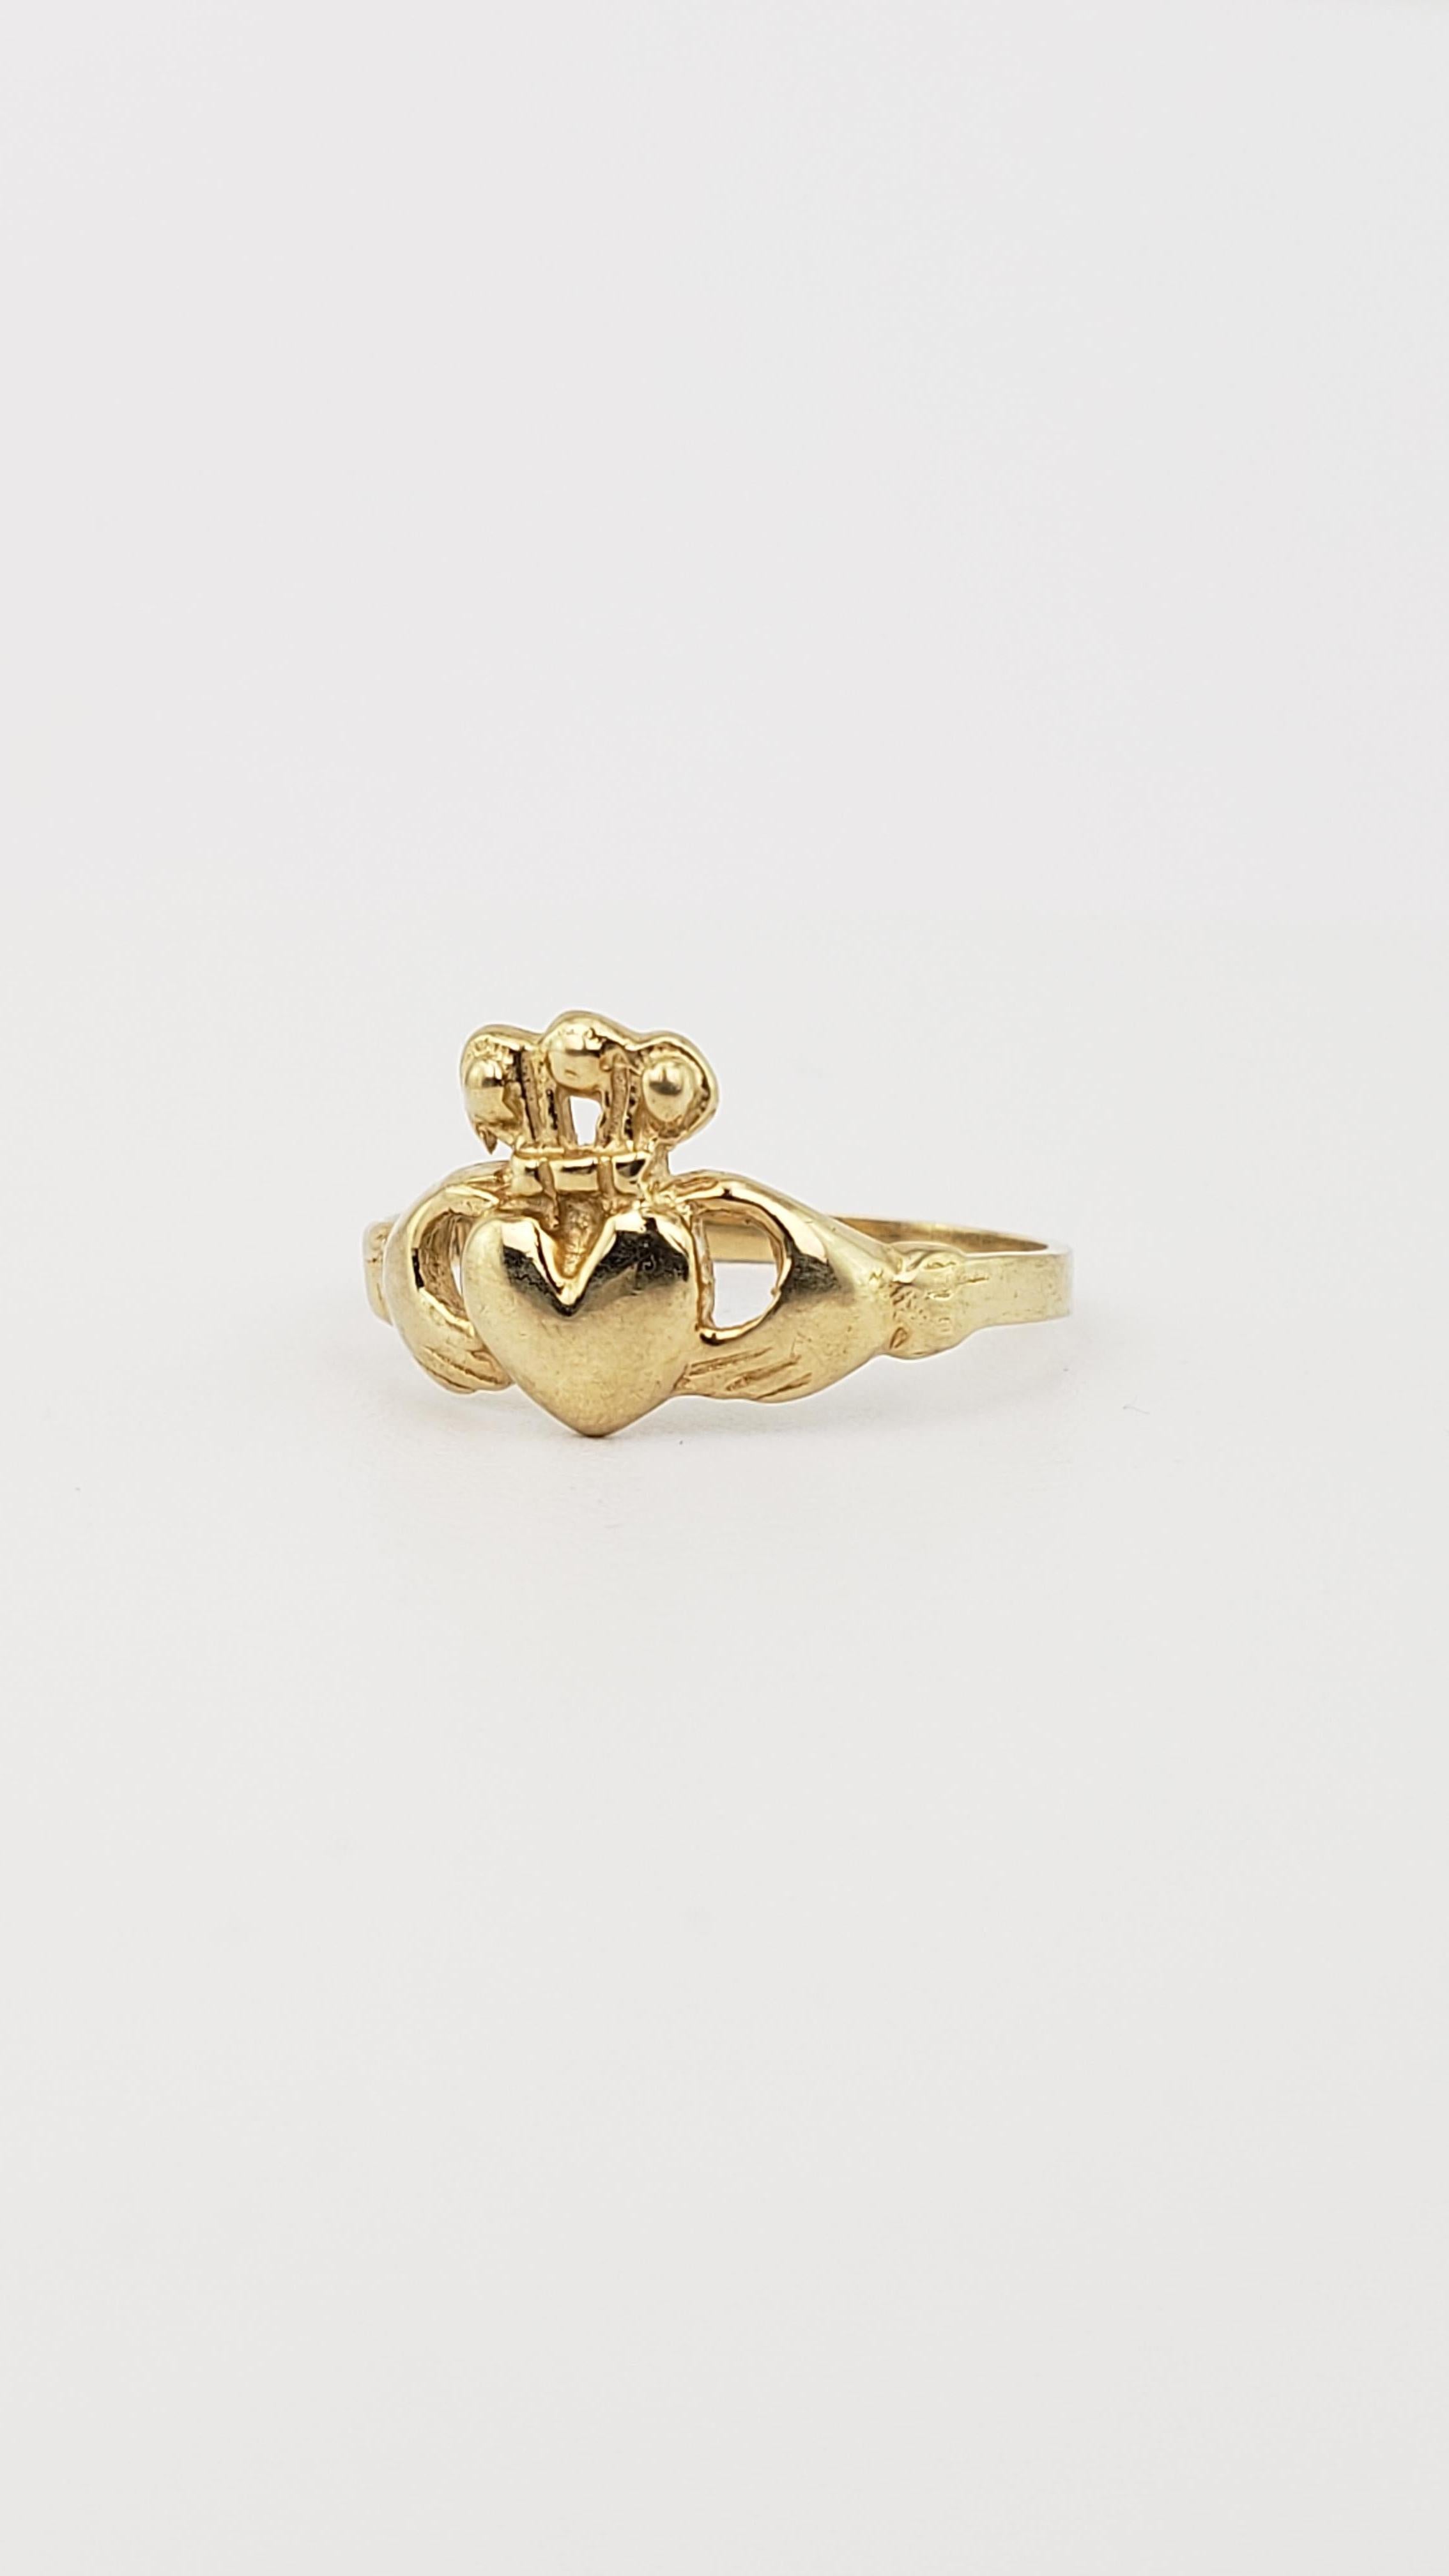 10K gold Irish Claddagh ring.

Size: 6 (Please inquire if you need size adjusted).